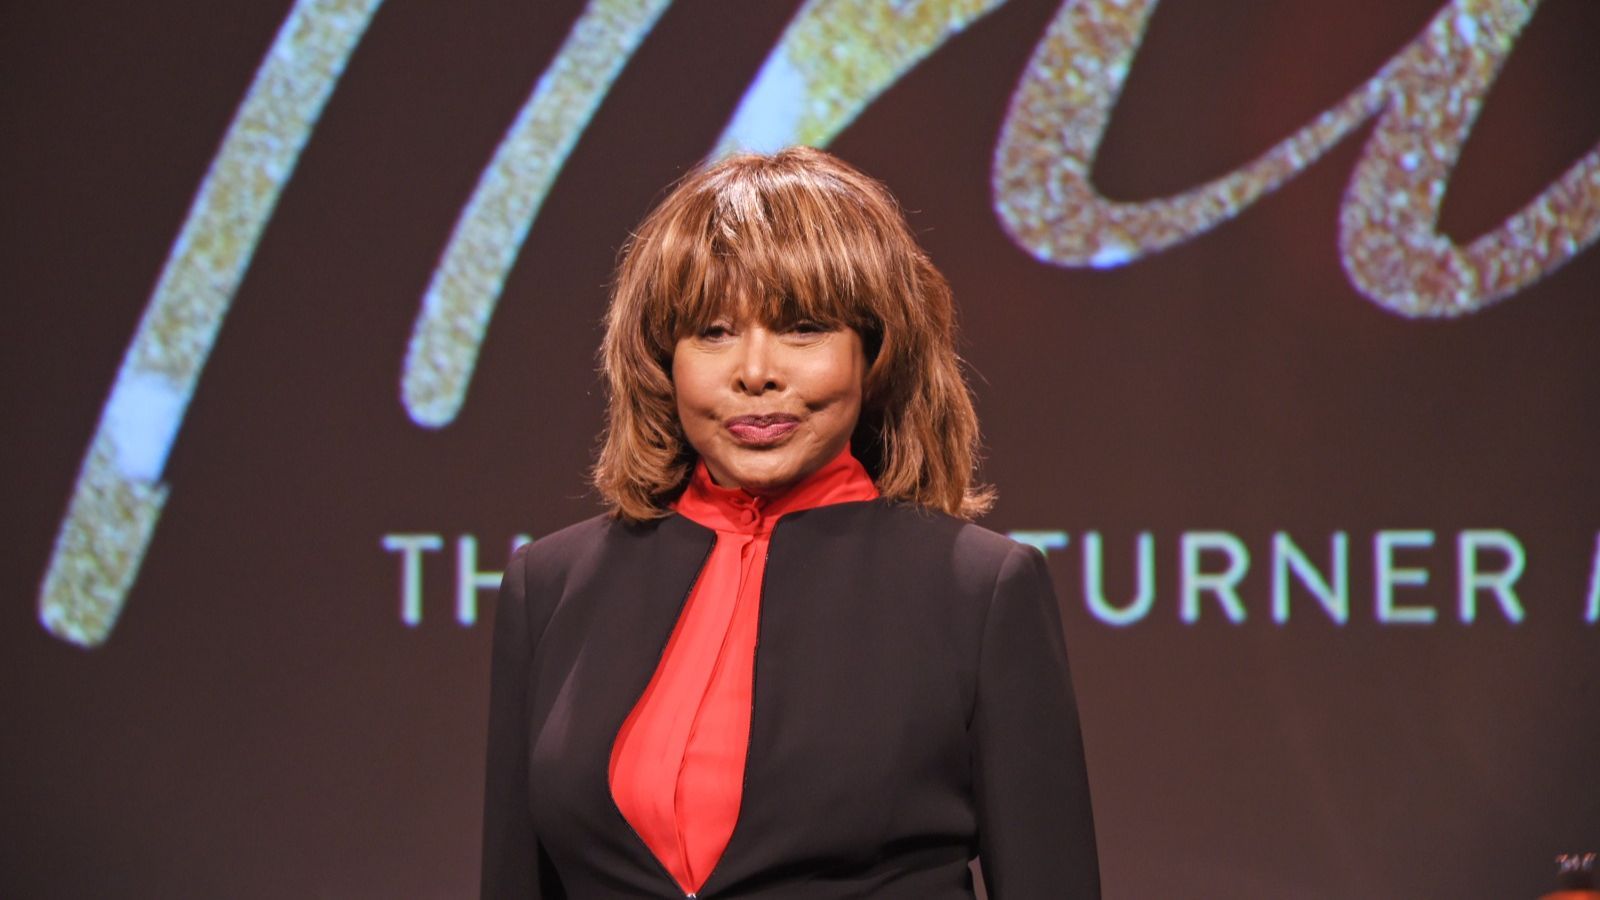 Tina Turner’s son Ronnie dies at 62: ‘You left this world too quickly’